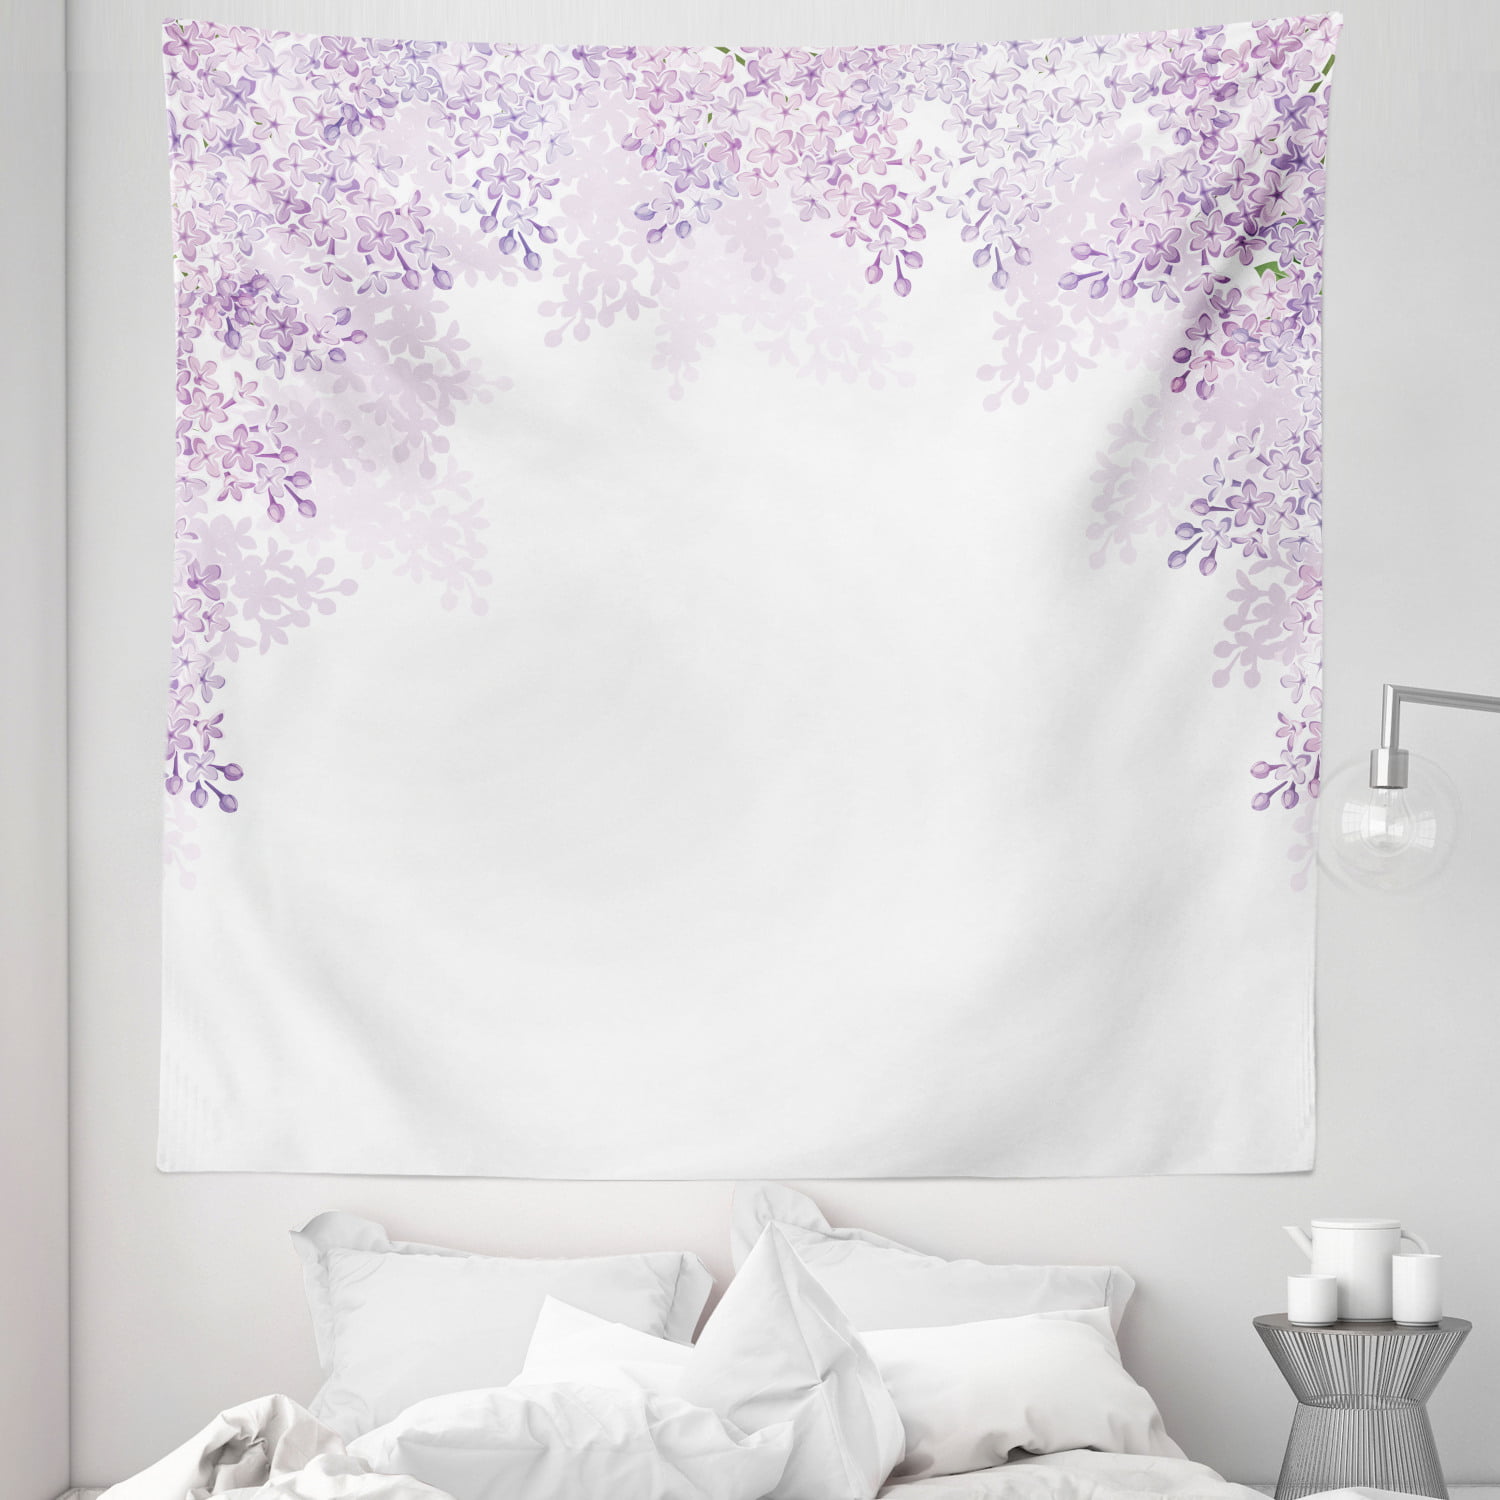 Lilac Tapestry Wall Hanging Art for Bedroom Dorm Room 2 Sizes Available 